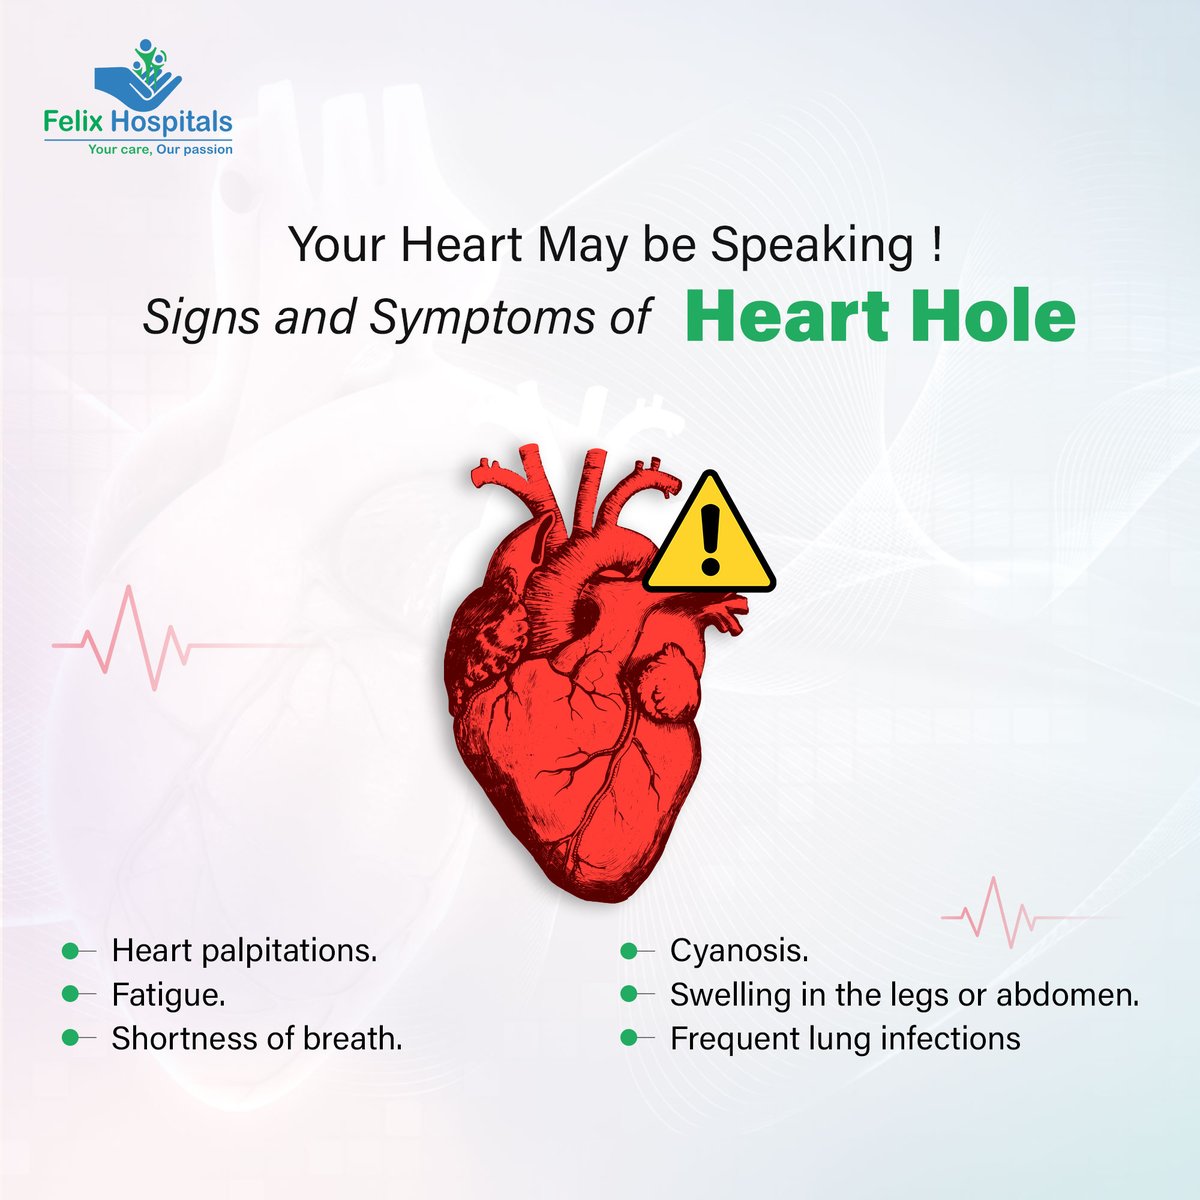 Don't ignore the signs. A hole in the heart may be a serious condition, but it is treatable when detected early. 
 Early detection saves lives. 💗

#heart #hearthole #heartattack #hearthealth #heartdisease #Heartwarming #Cardiology #besthospitalinnoida #hospitalnear #everyone